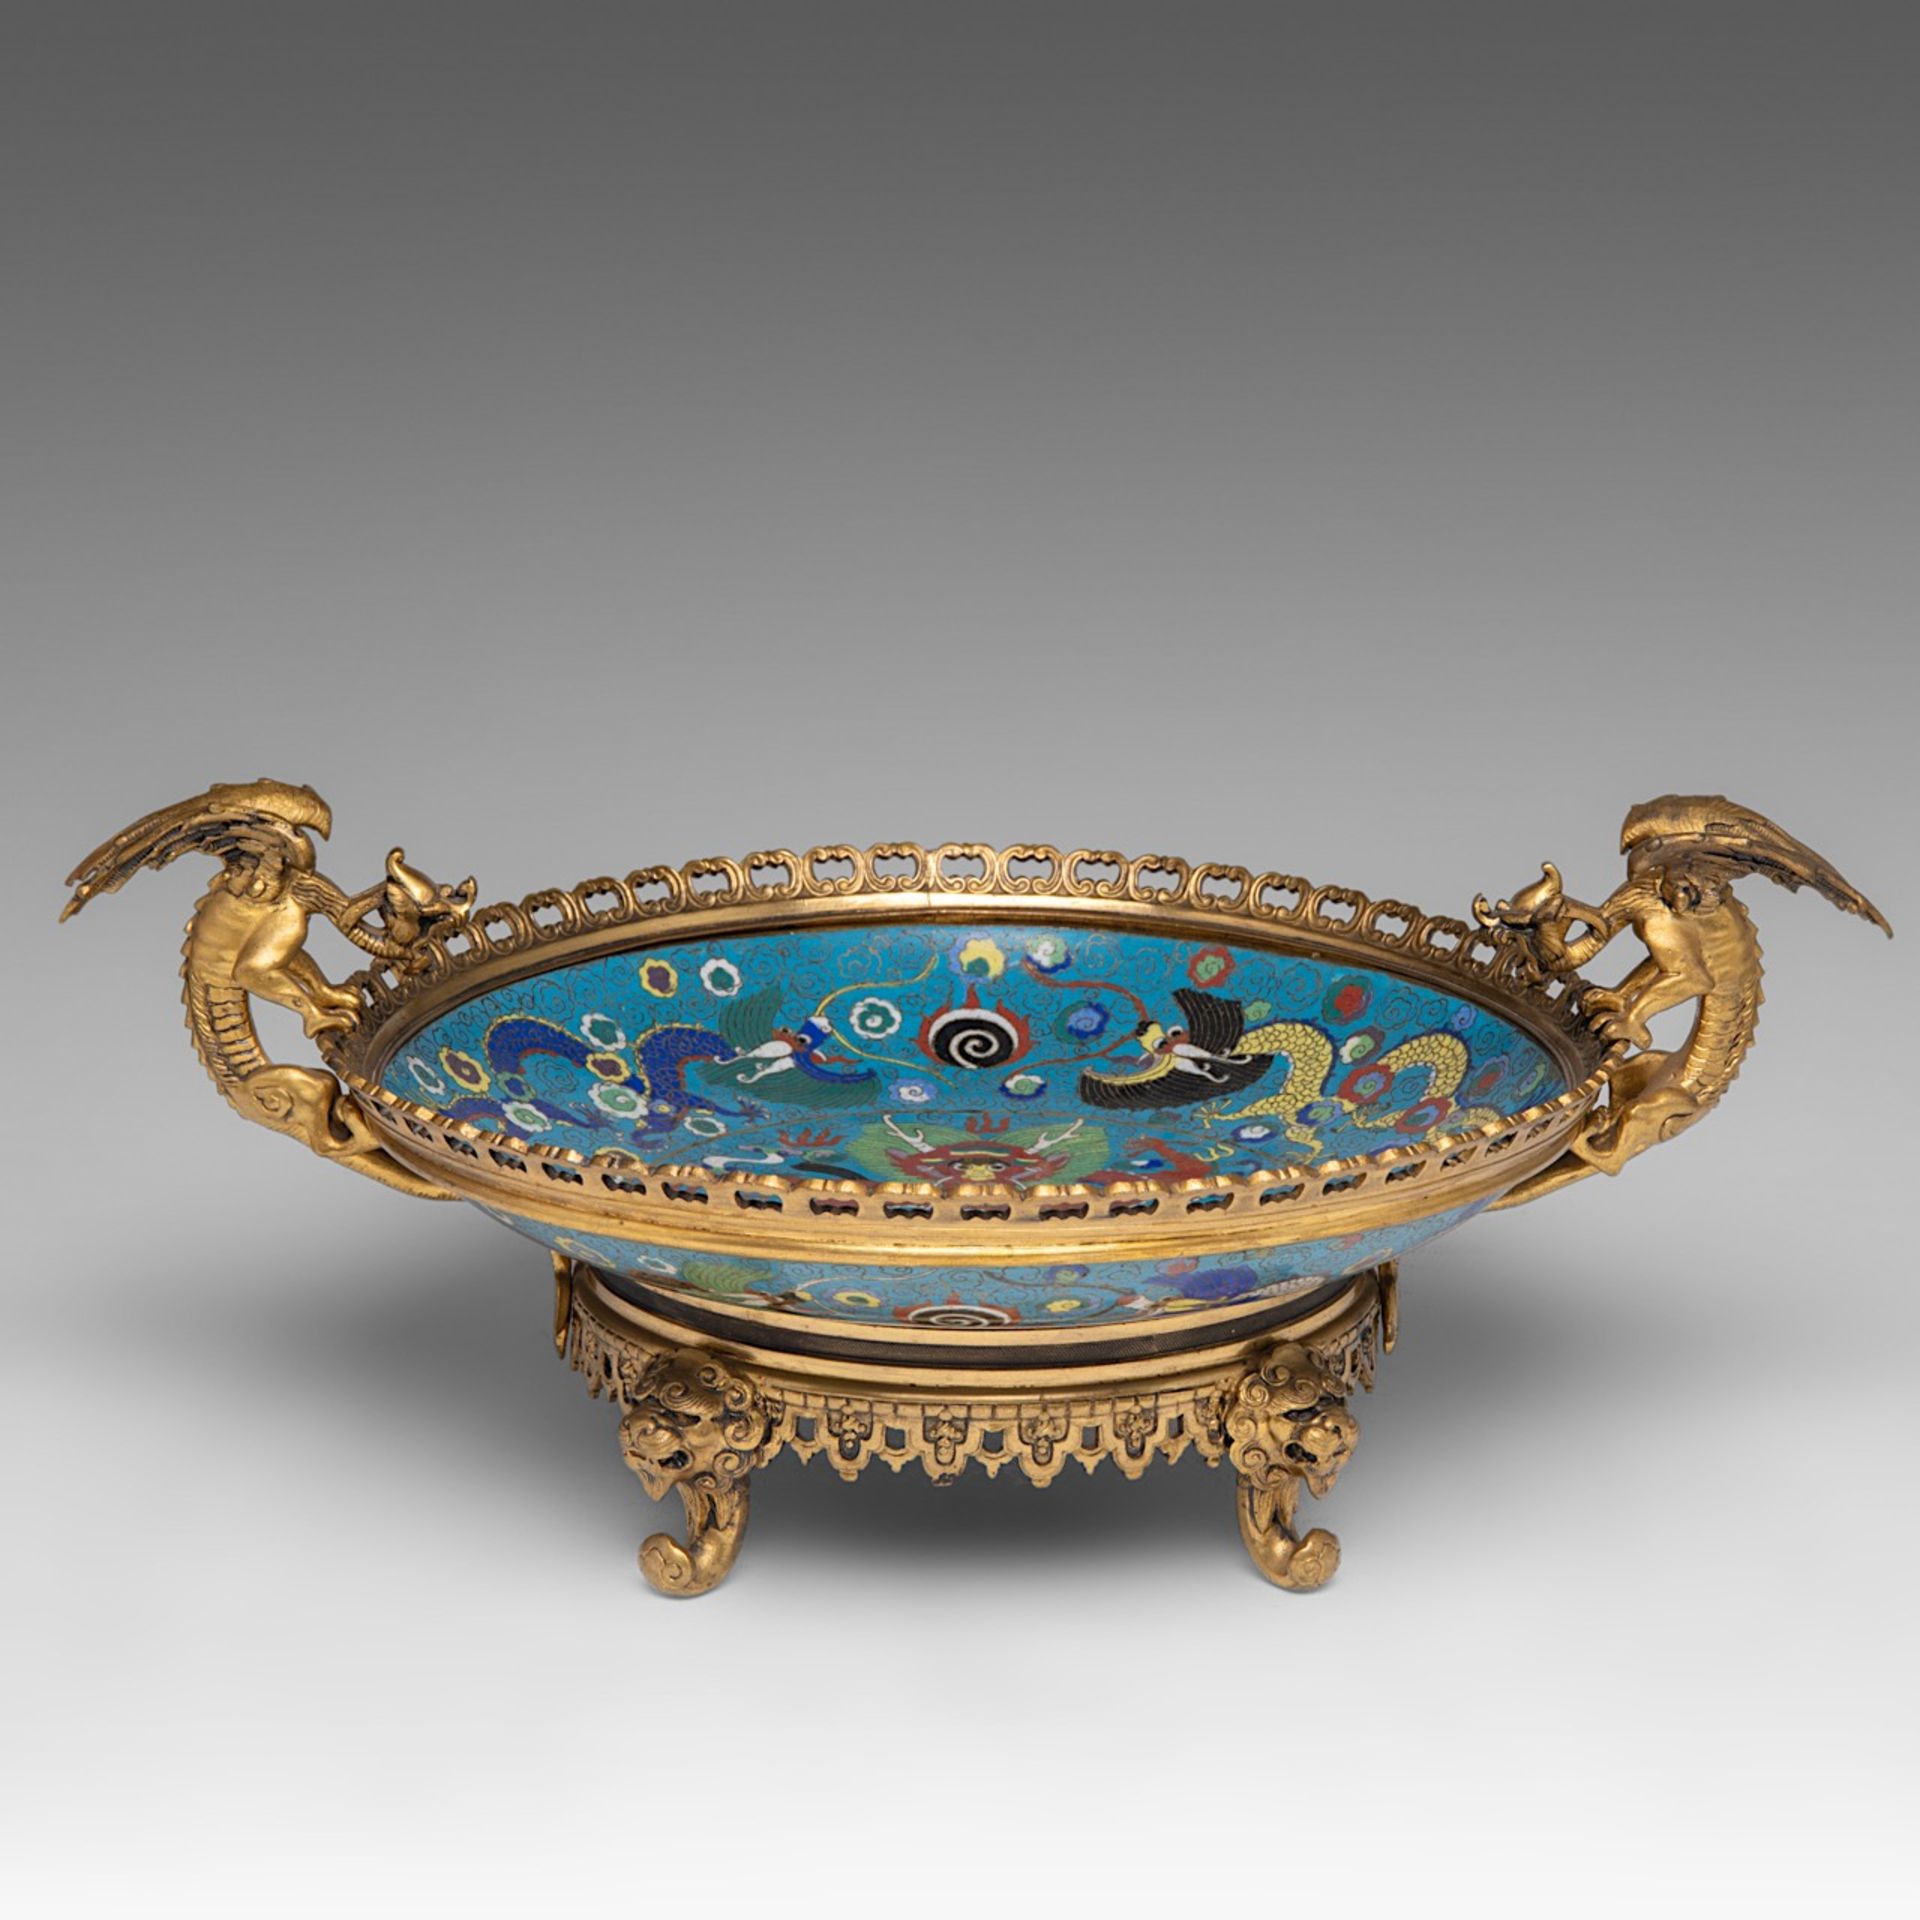 A Chinese cloisonne enamelled 'Dragon' plate, raised on gilt bronze mounts, 19thC, dia 31,5 cm - Image 4 of 9